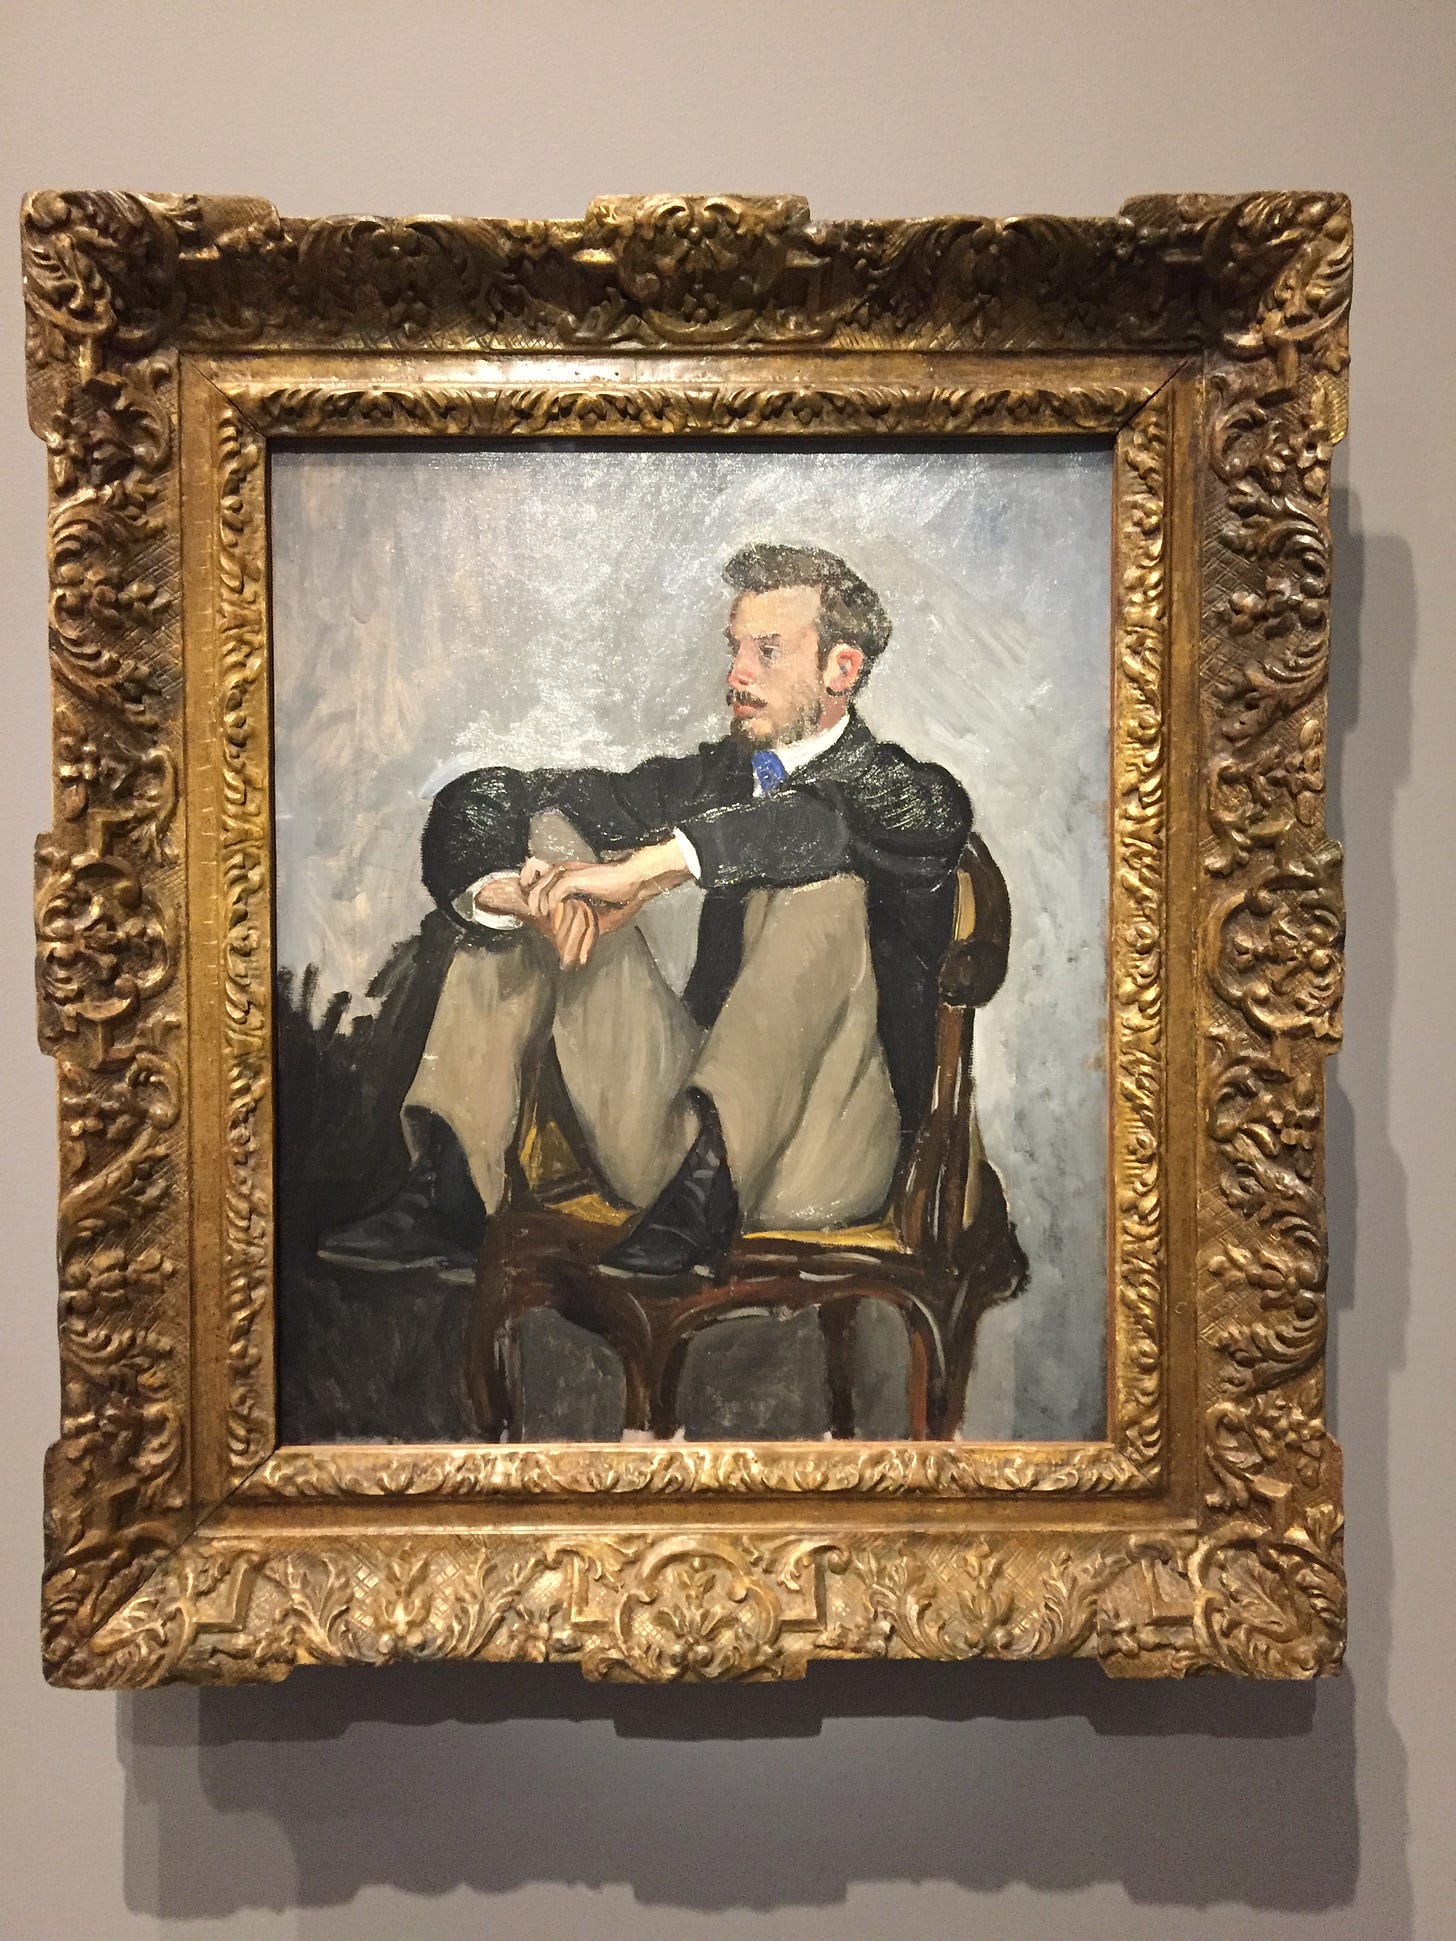 Frédéric Bazille’s portrait of Pierre-Auguste Renoir. He is sitting on a chair with his legs drawn.